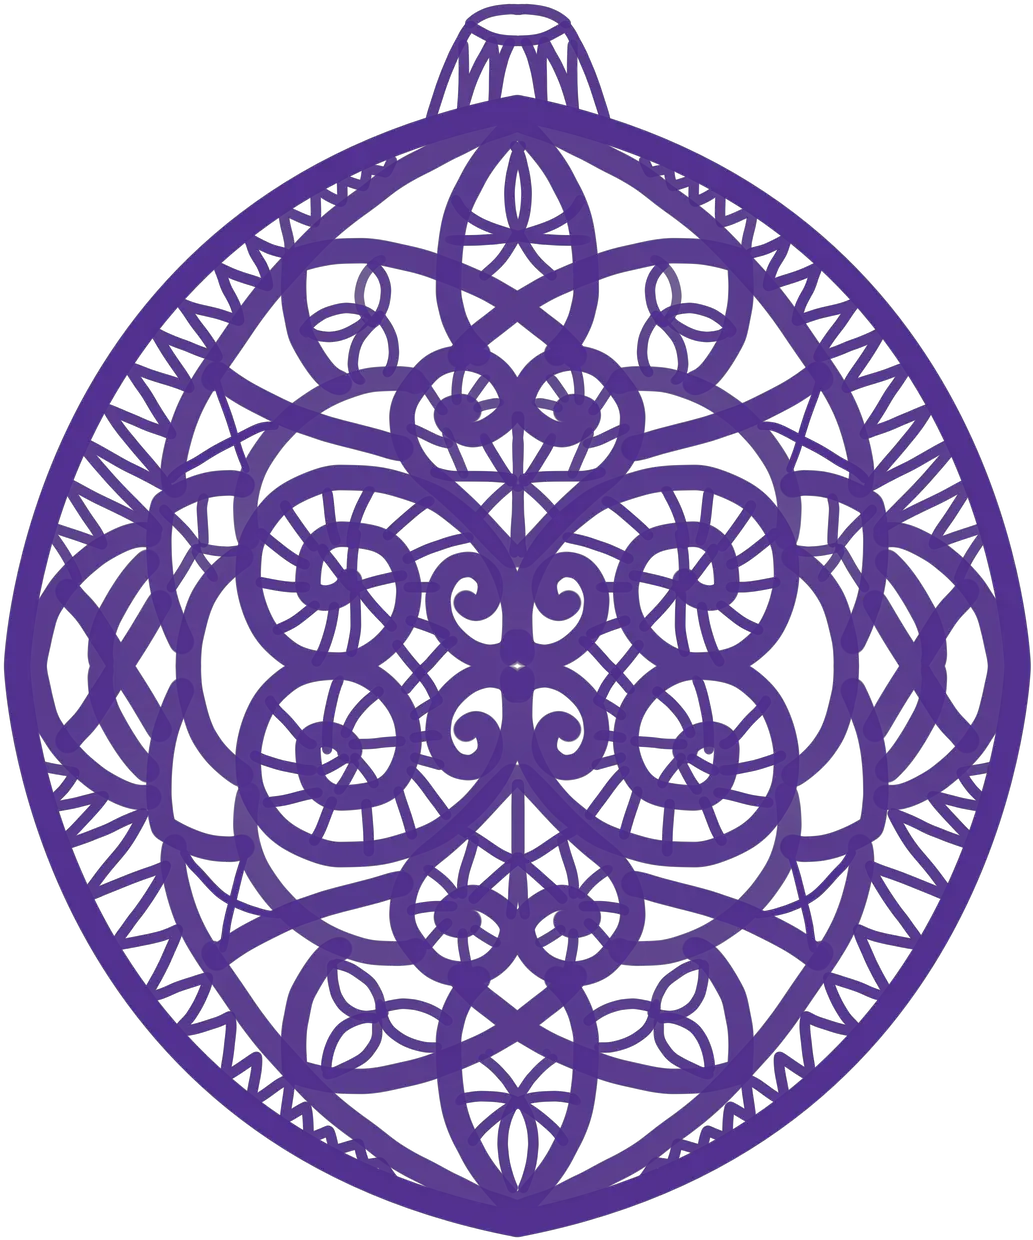 Azimuth Circle Hd Png Download Lipid Exchange Between Membranes Lace Circle Png